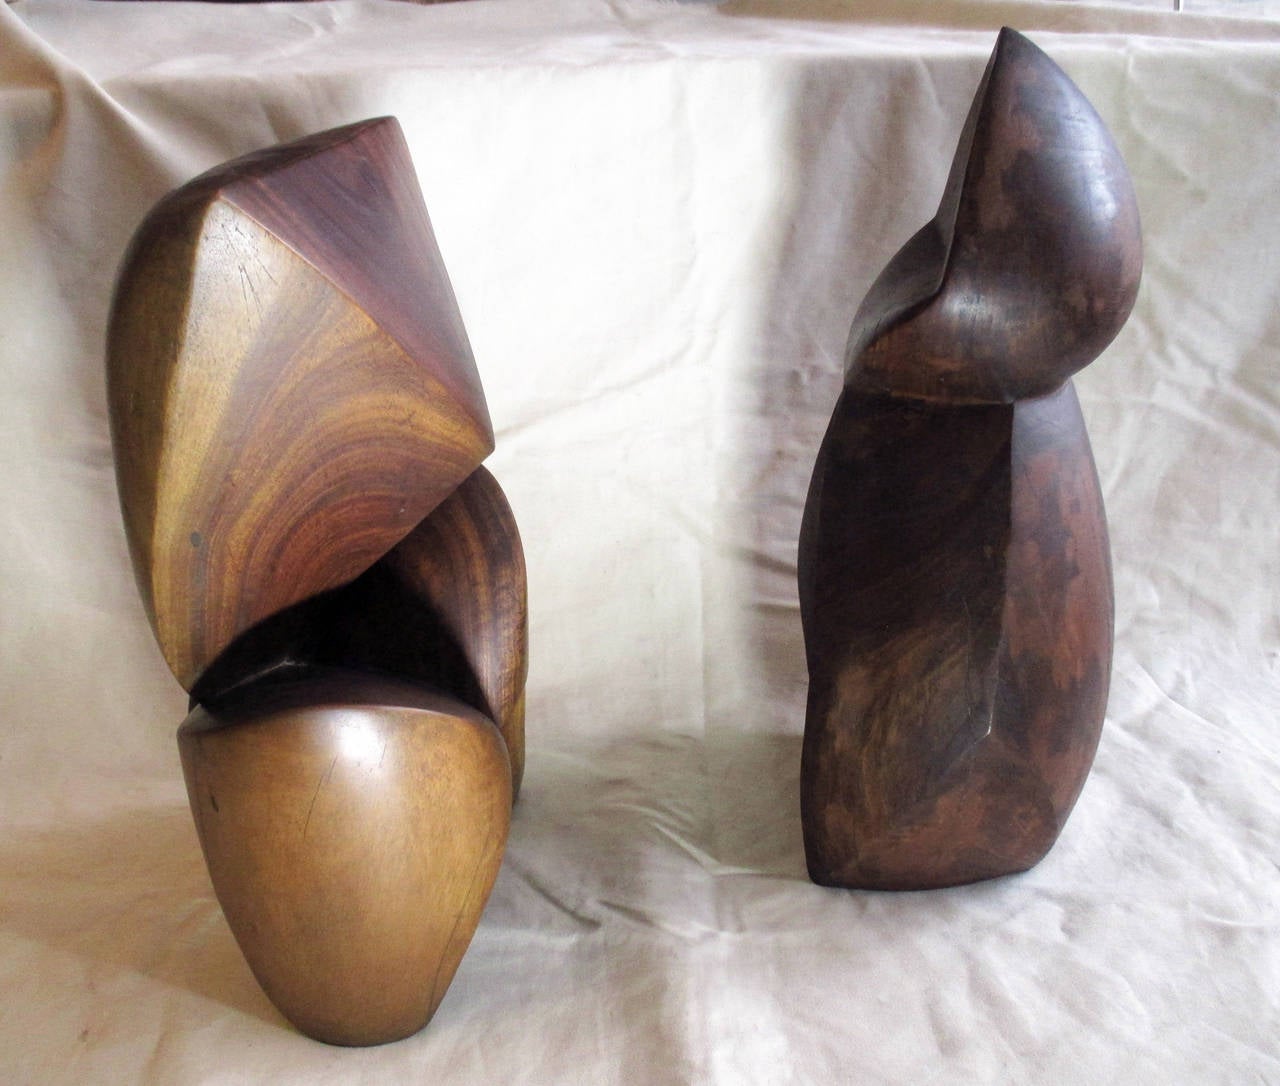 Two abstract wood carved sculptures by unknown artist. Each piece carved of a single trunk of tropical wood.  
Triangular sculpture is 52cm height, 29cm width, 22cm depth.
Circular sculpture is 55cm height, 30cm width, 23cm depth.